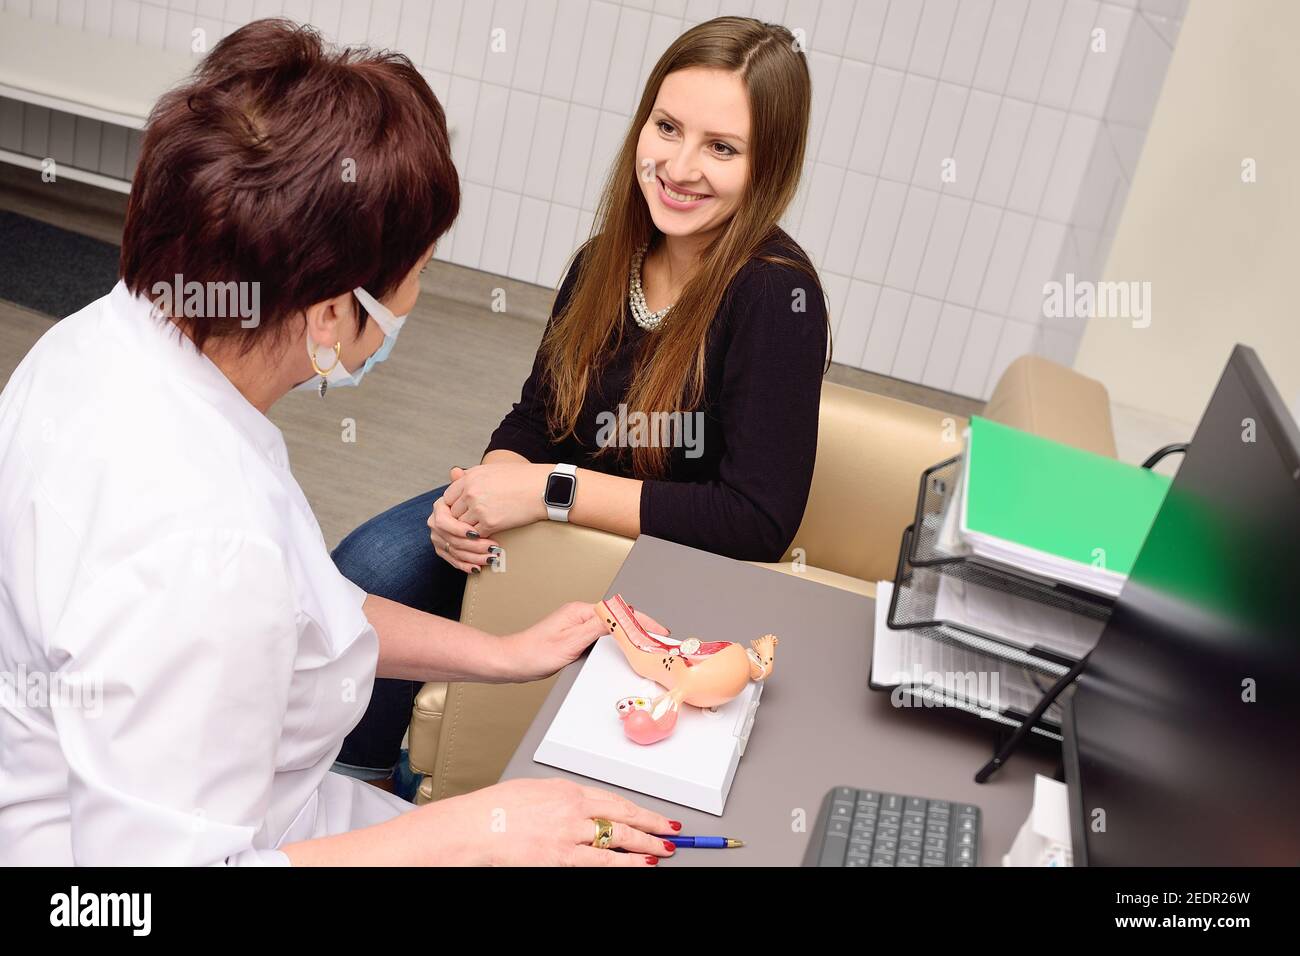 a young woman is being consulted by an obstetrician-gynecologist. Stock Photo